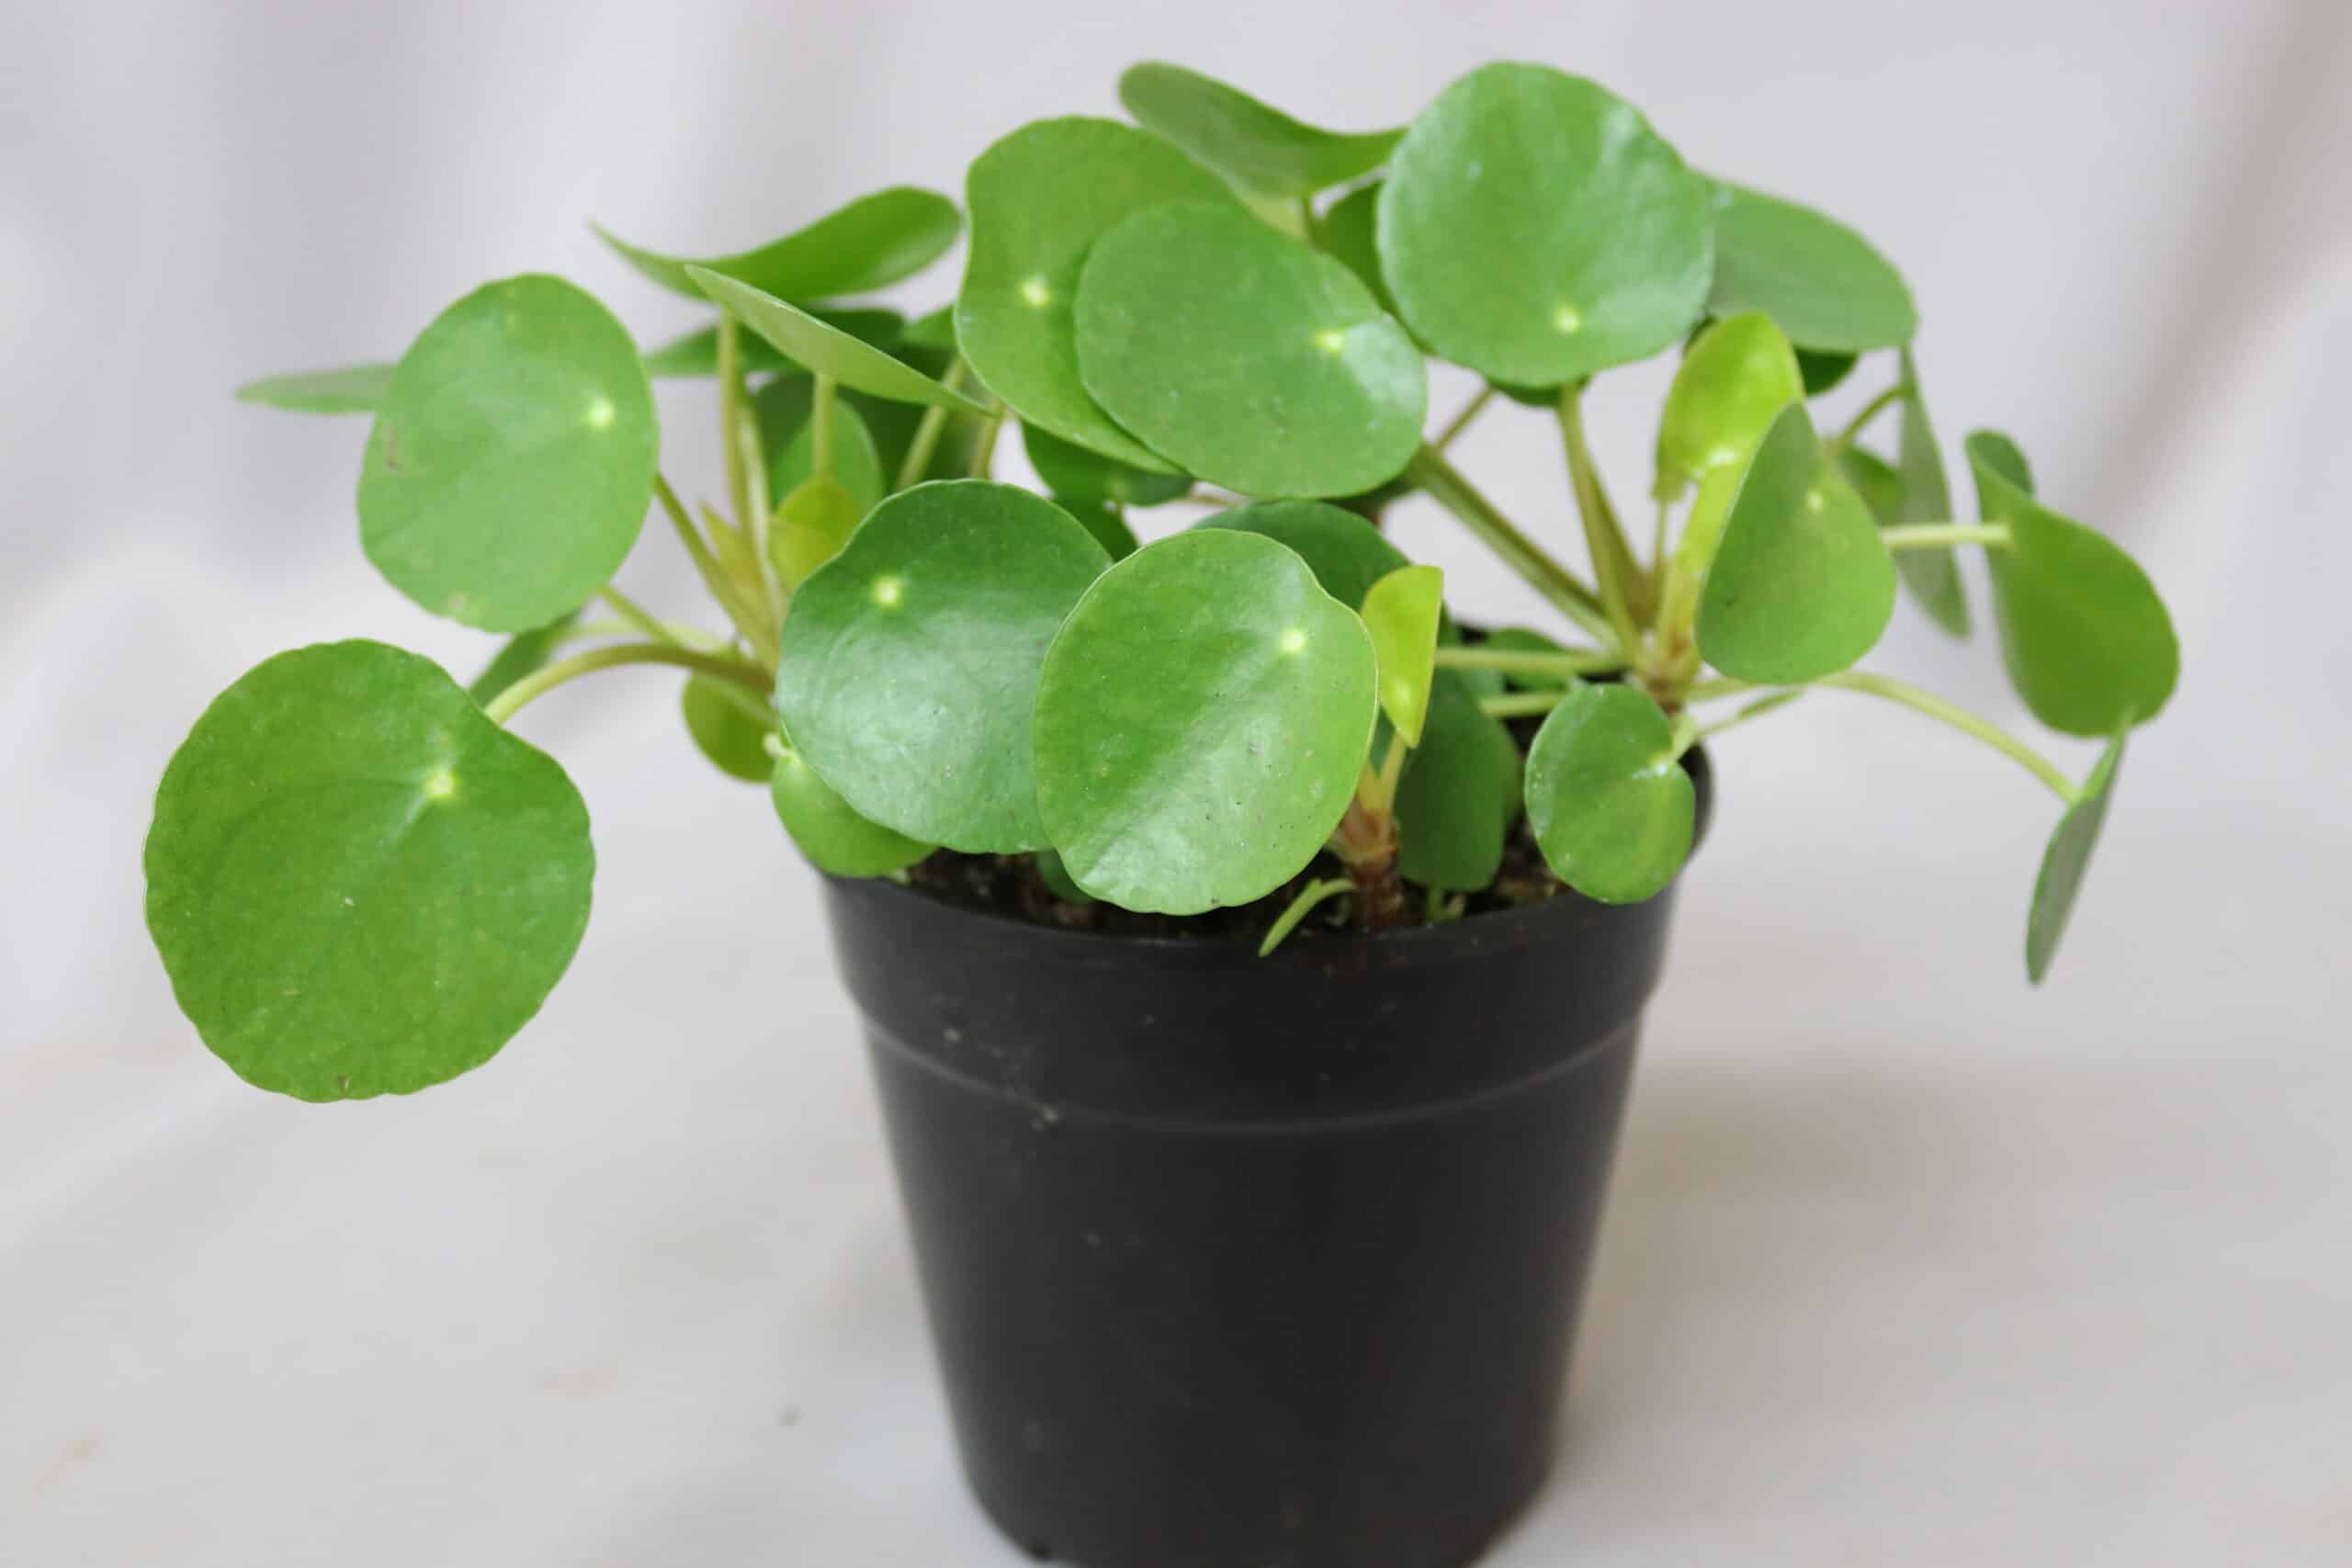 A green Pilea Peperomoides plant in a black pot against a white background.